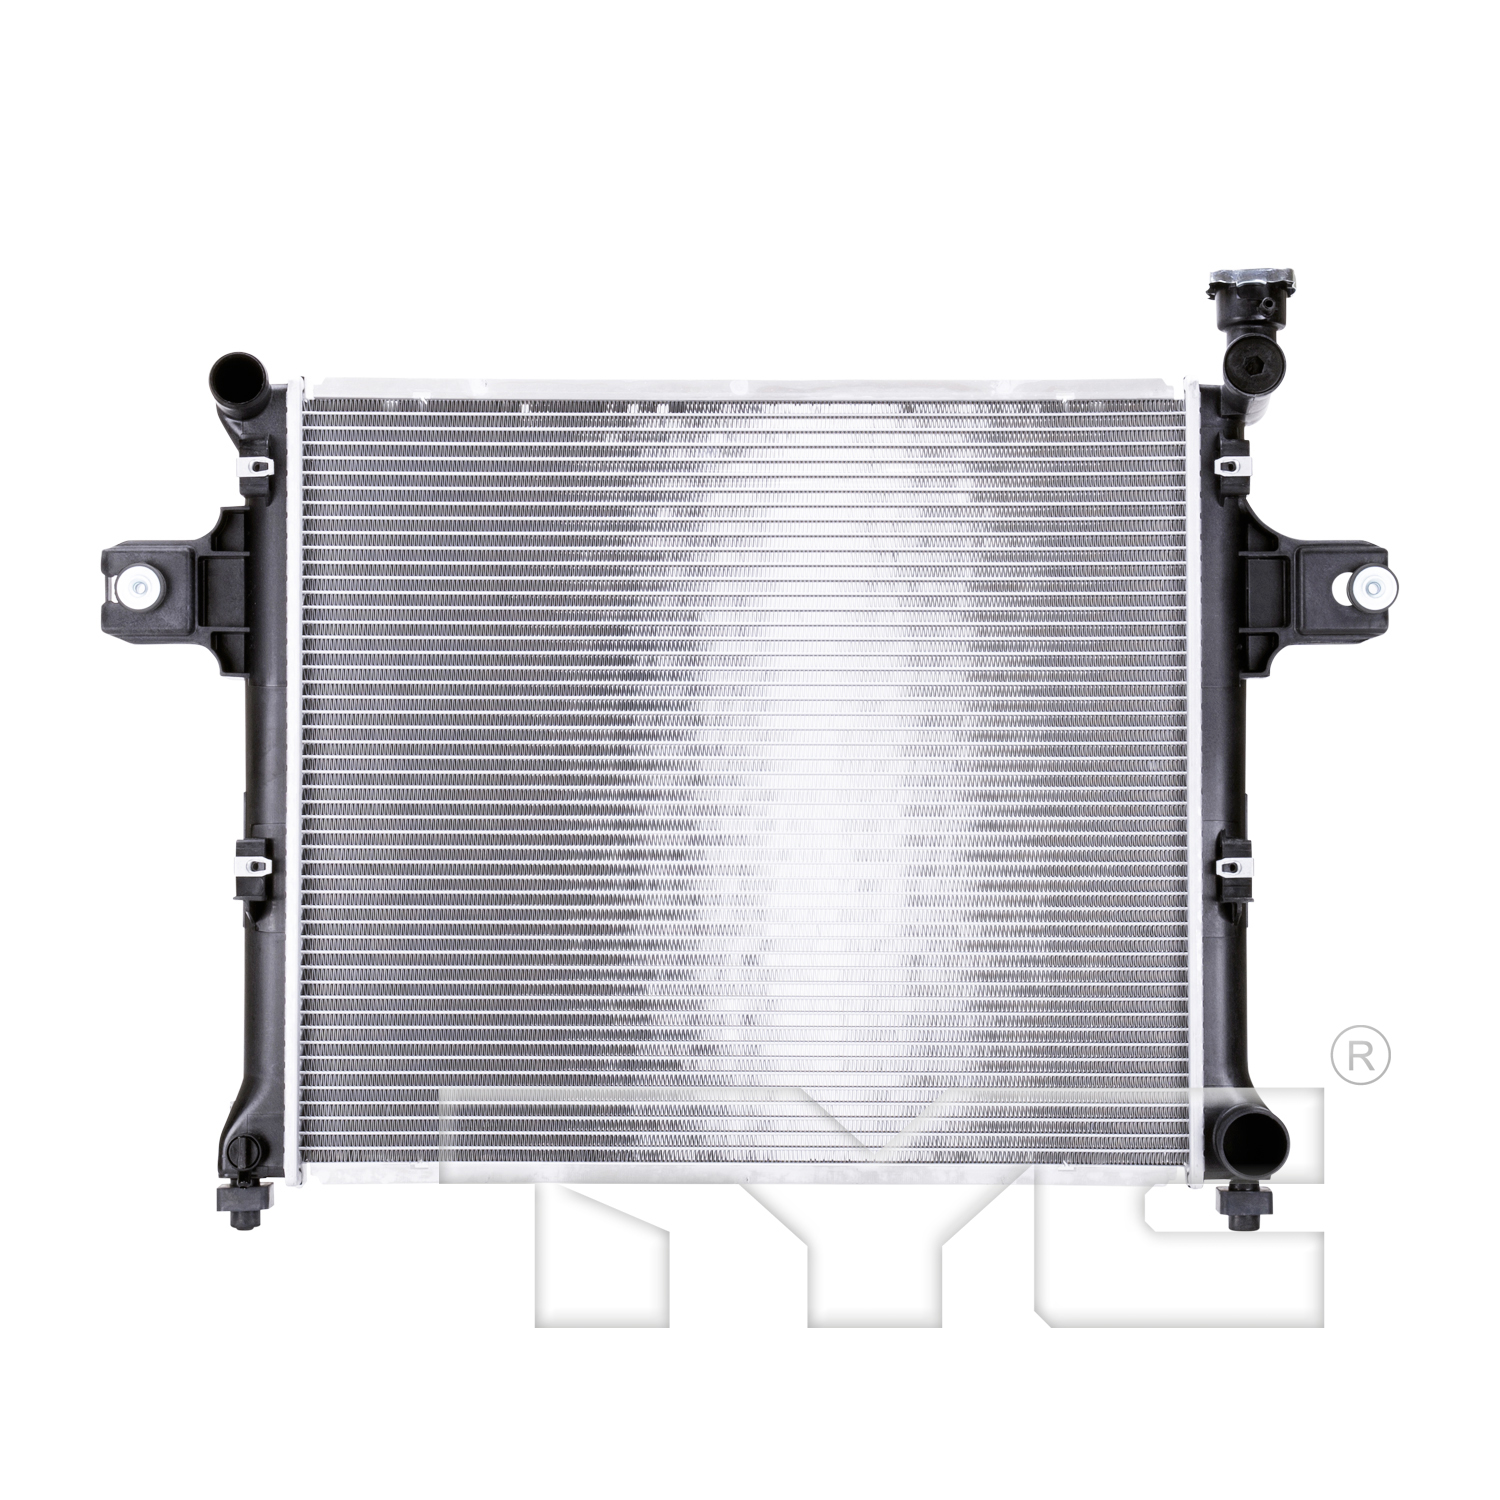 Aftermarket RADIATORS for JEEP - GRAND CHEROKEE, GRAND CHEROKEE,05-10,Radiator assembly